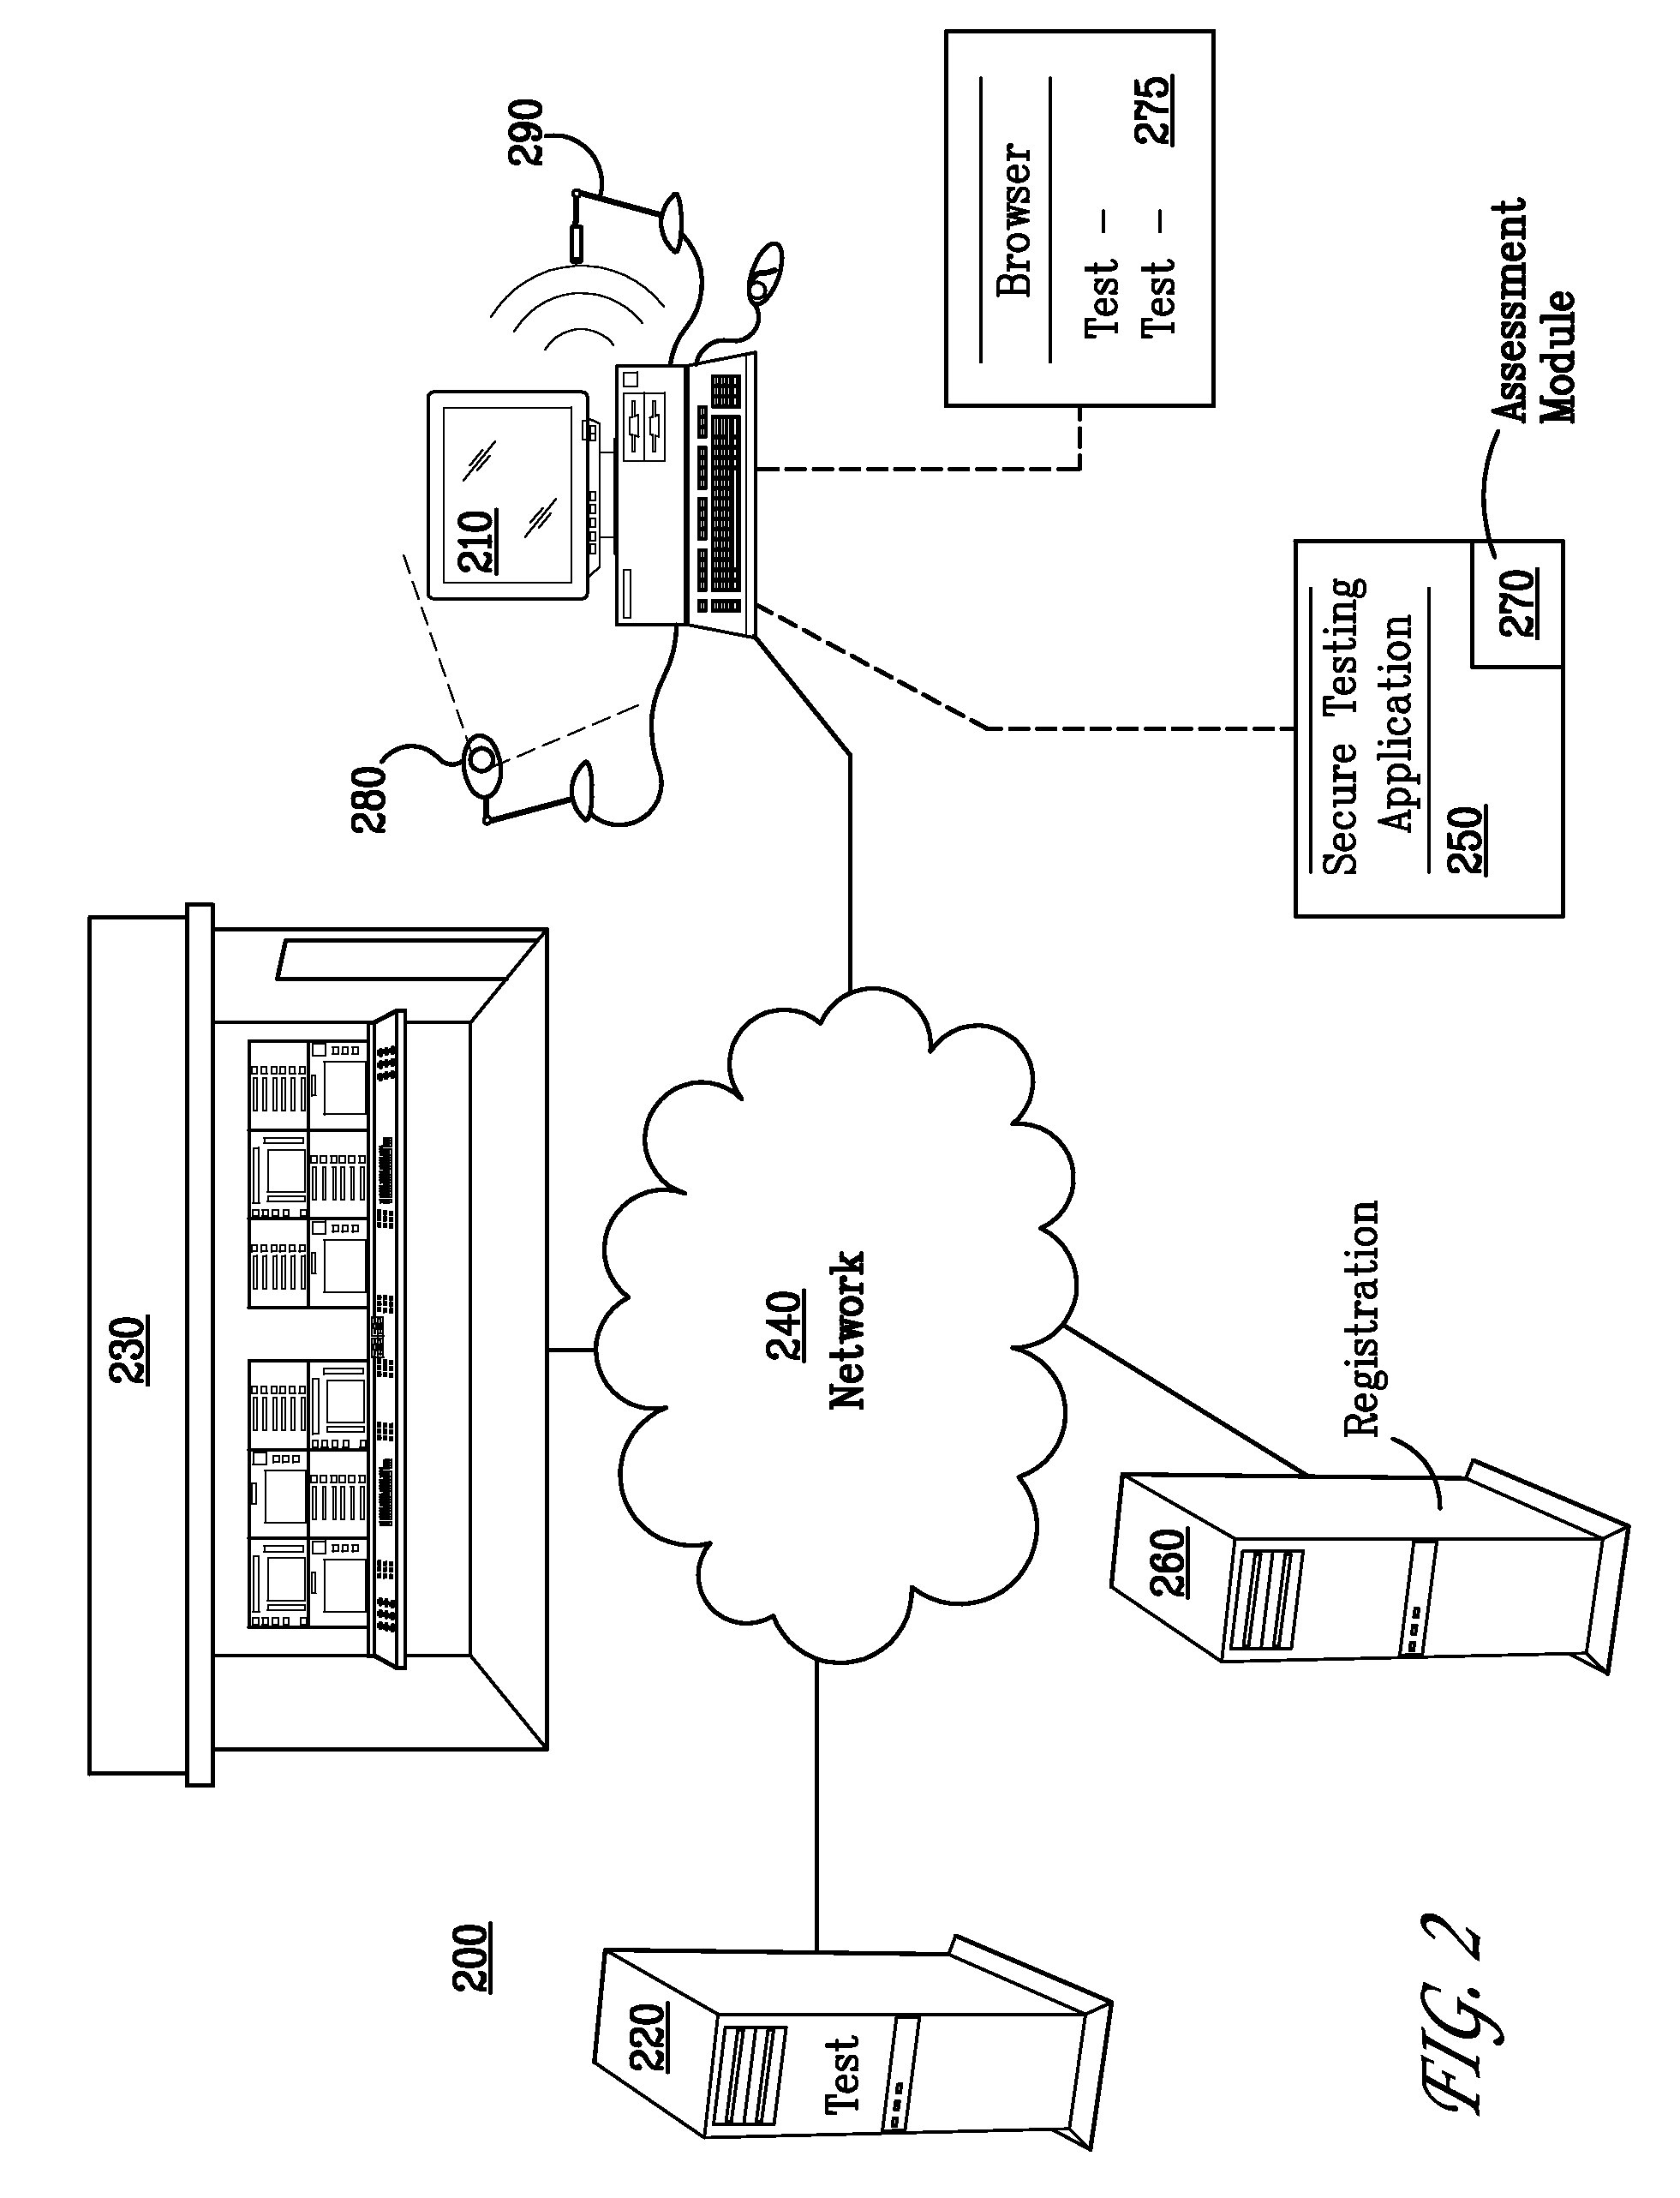 Maintaining a Secure Computing Device in a Test Taking Environment